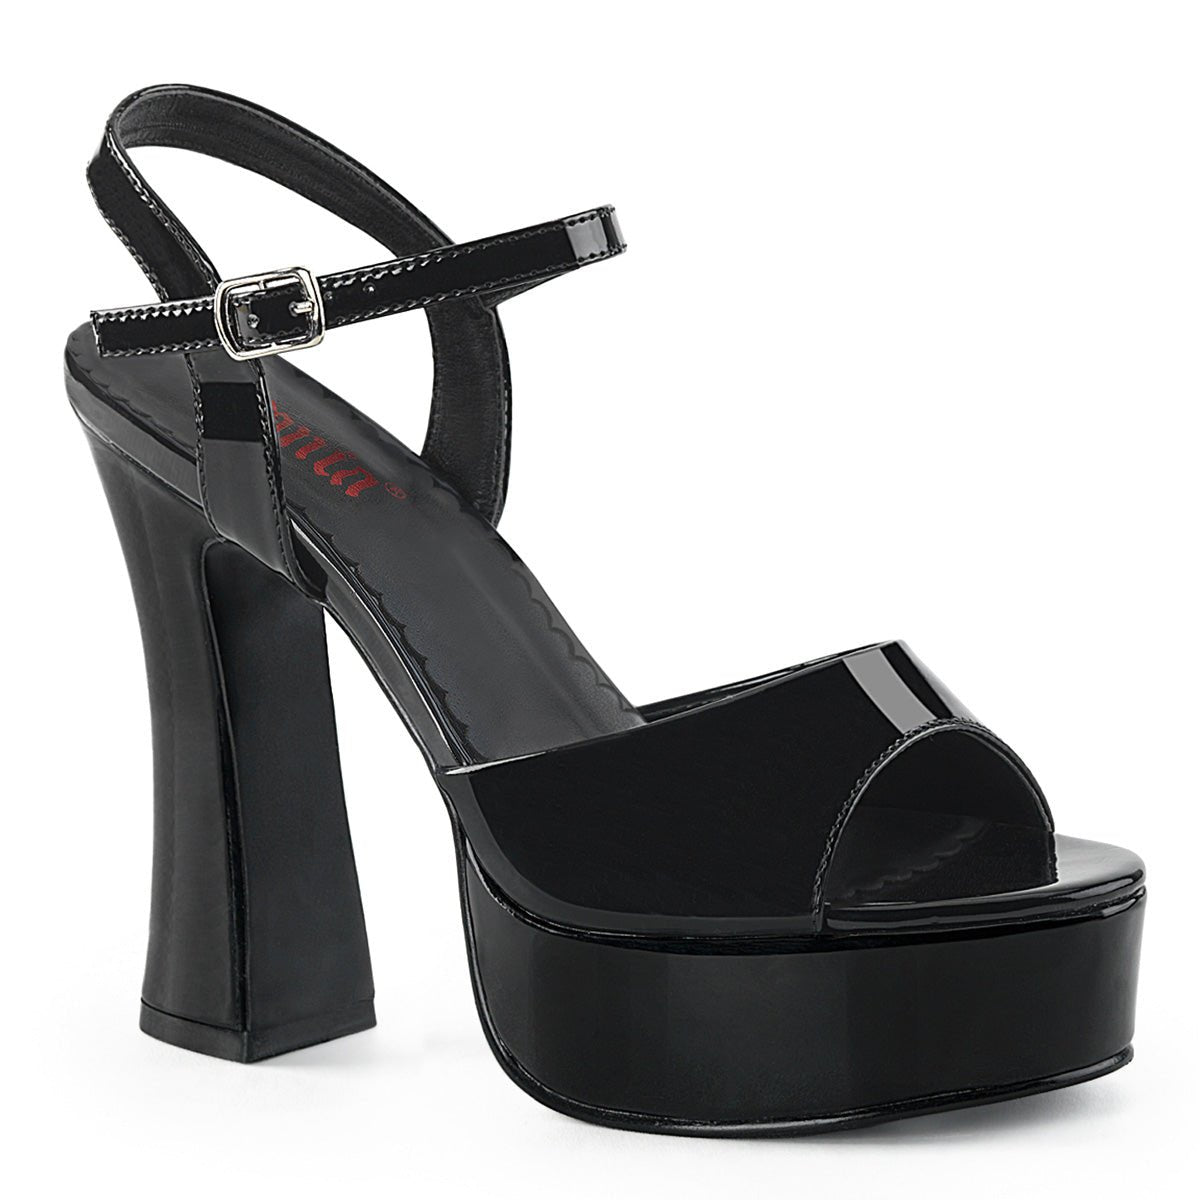 Too Fast | Demonia Dolly 09 | Black Patent Leather Women's Sandals